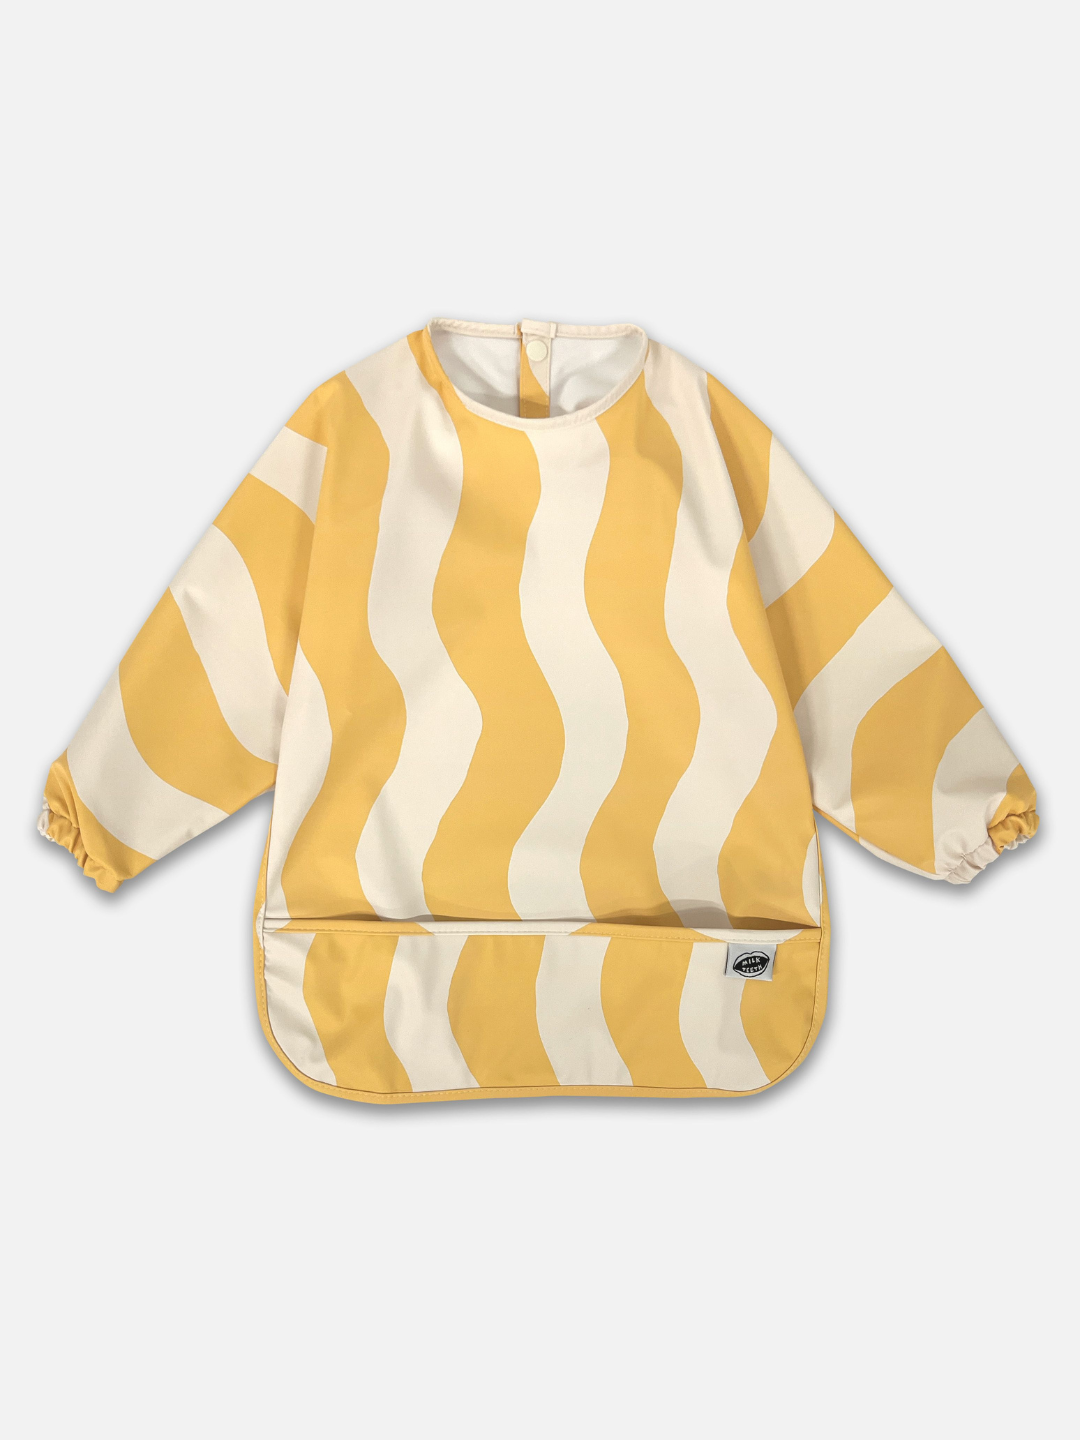 Butter Waves | A front view  of the long sleeve yellow and white wavy bib and a front pocket.